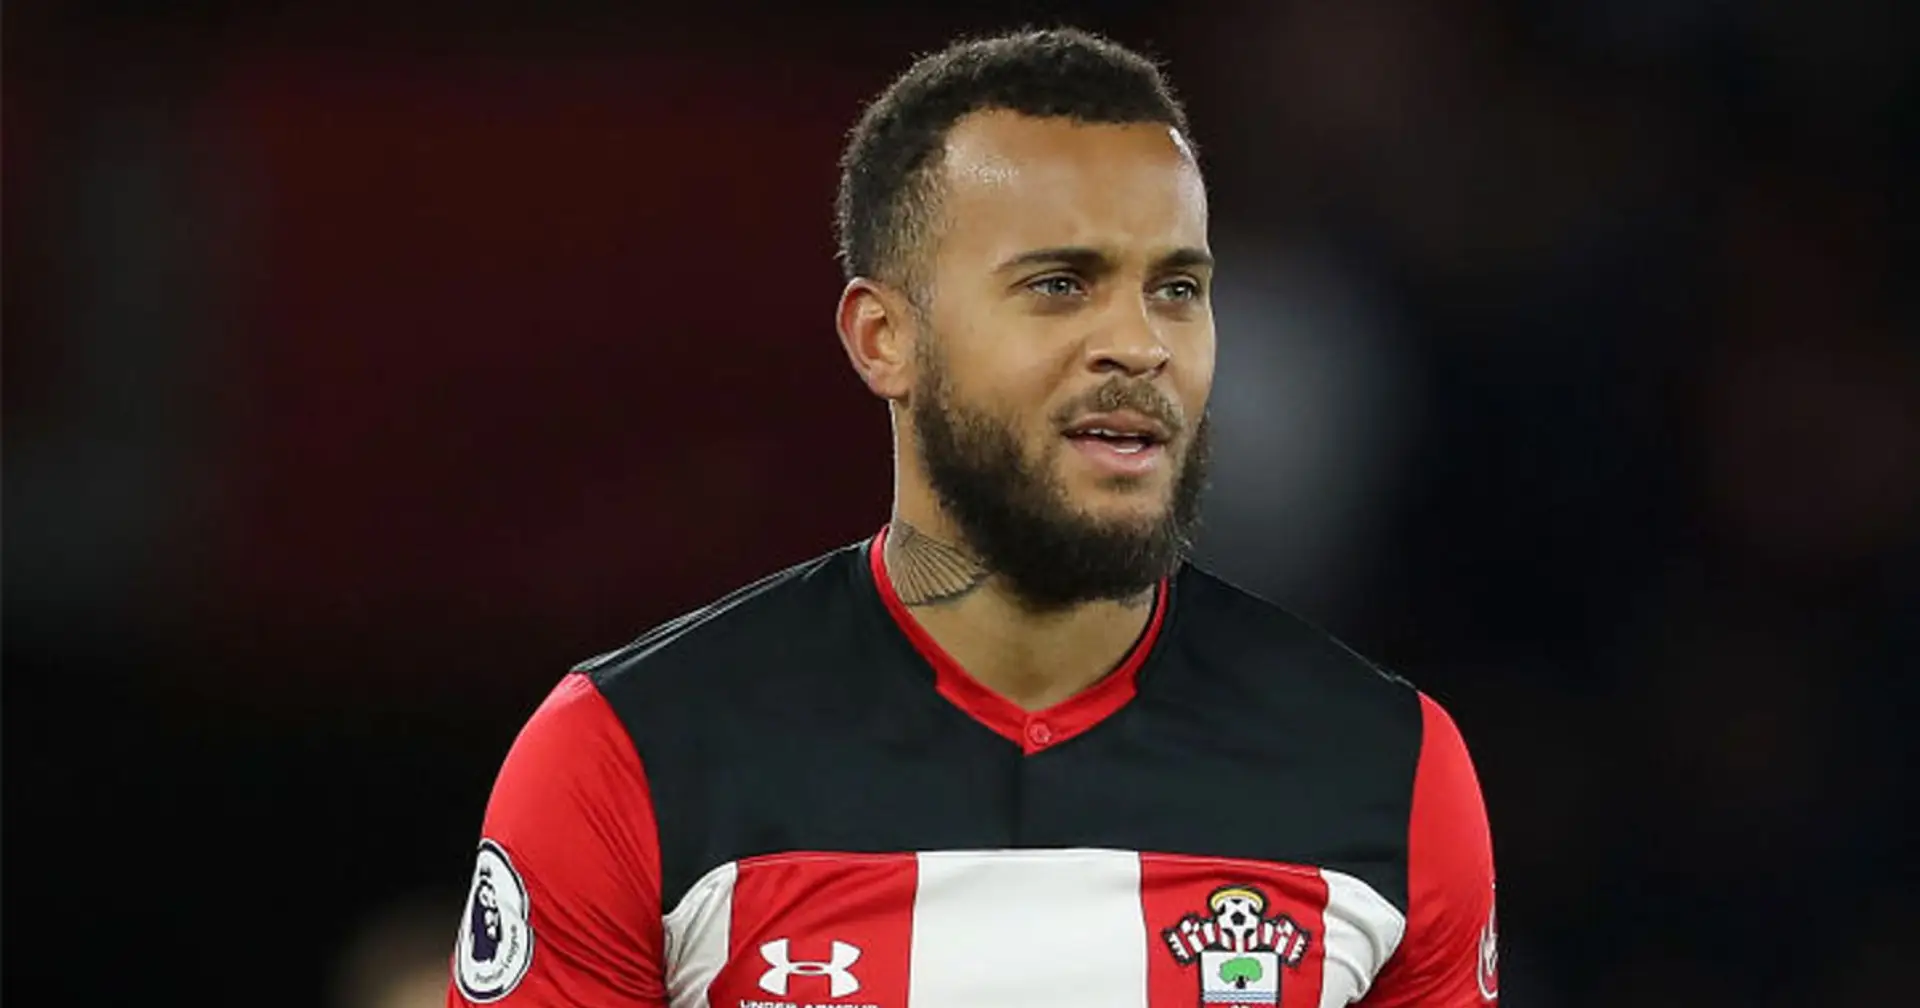 Ryan Bertrand singles out United’s biggest threat ahead of Southampton clash